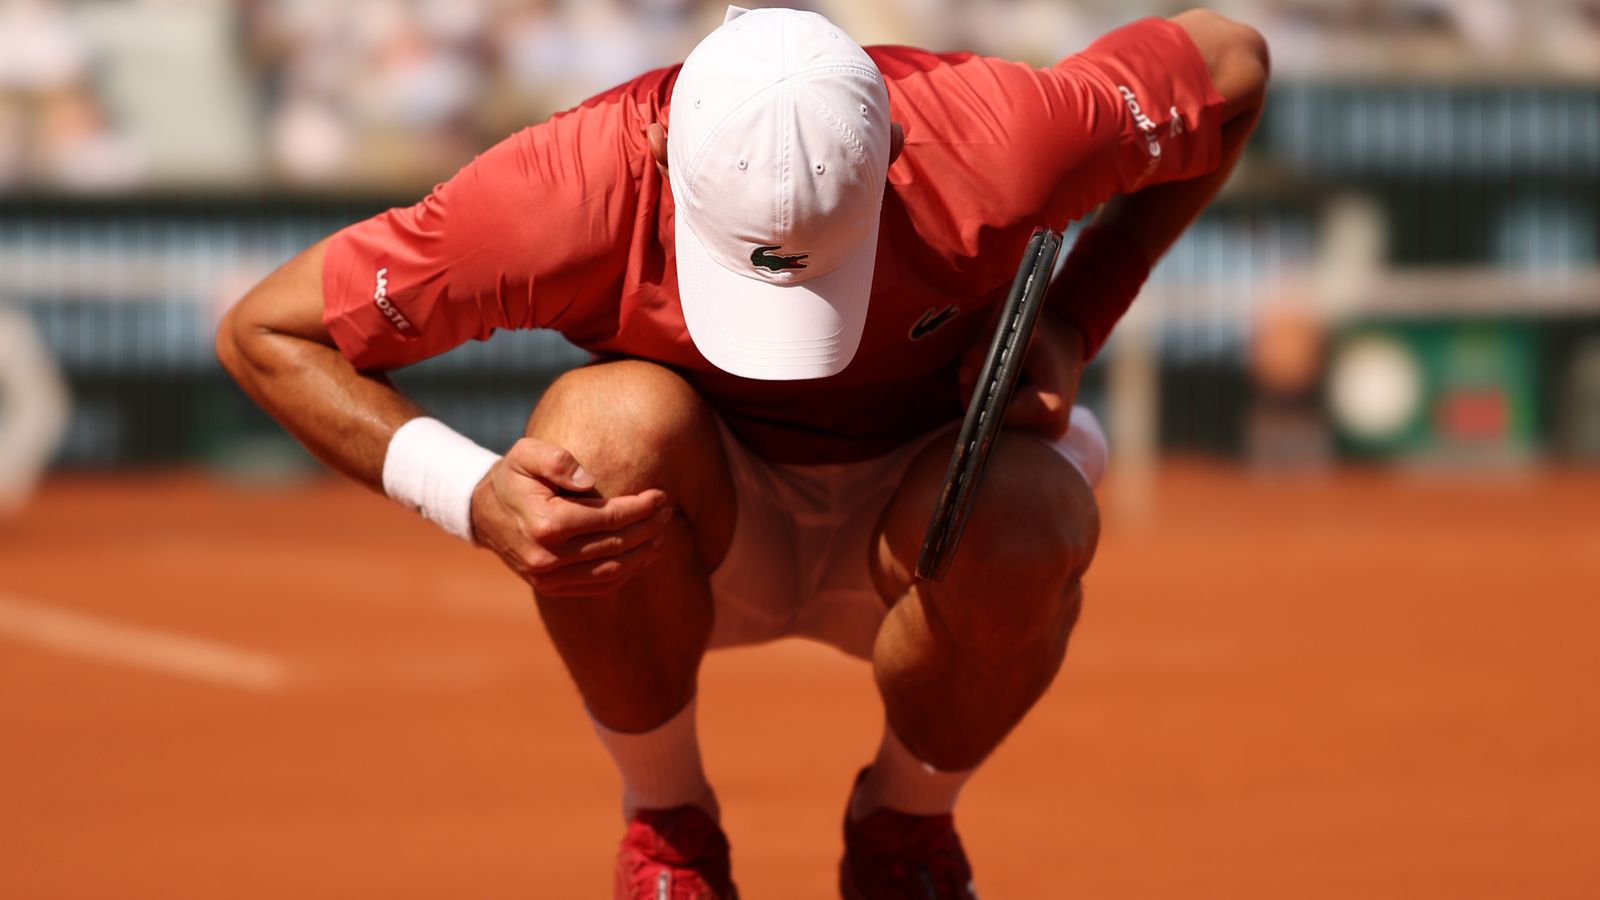 Novak Djokovic pulls out of French Open due to knee injury: What does it mean for his Wimbledon hopes?